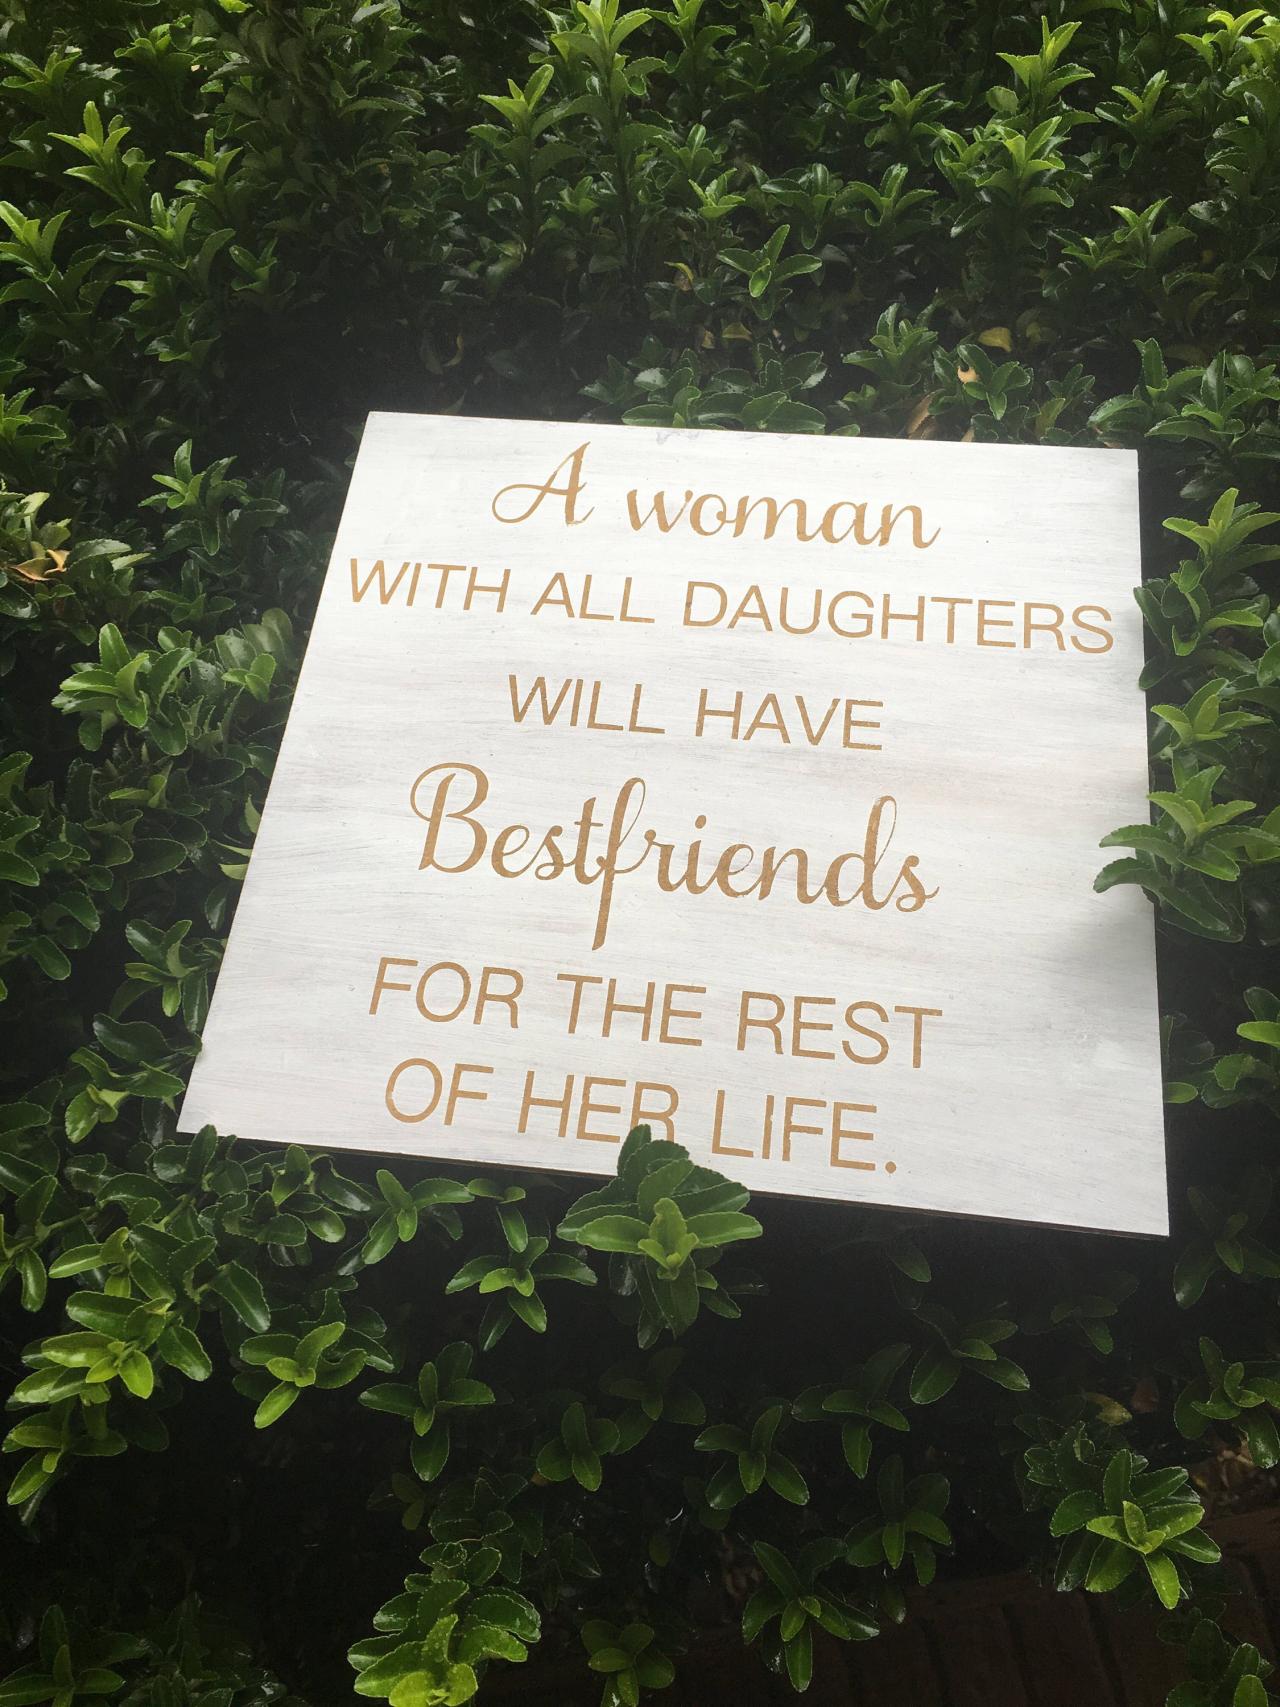 A Woman With All Daughters Will Have Bestfriends For The Rest Of Her Life. Stained And Hand Painted Wood Sign- 12x12